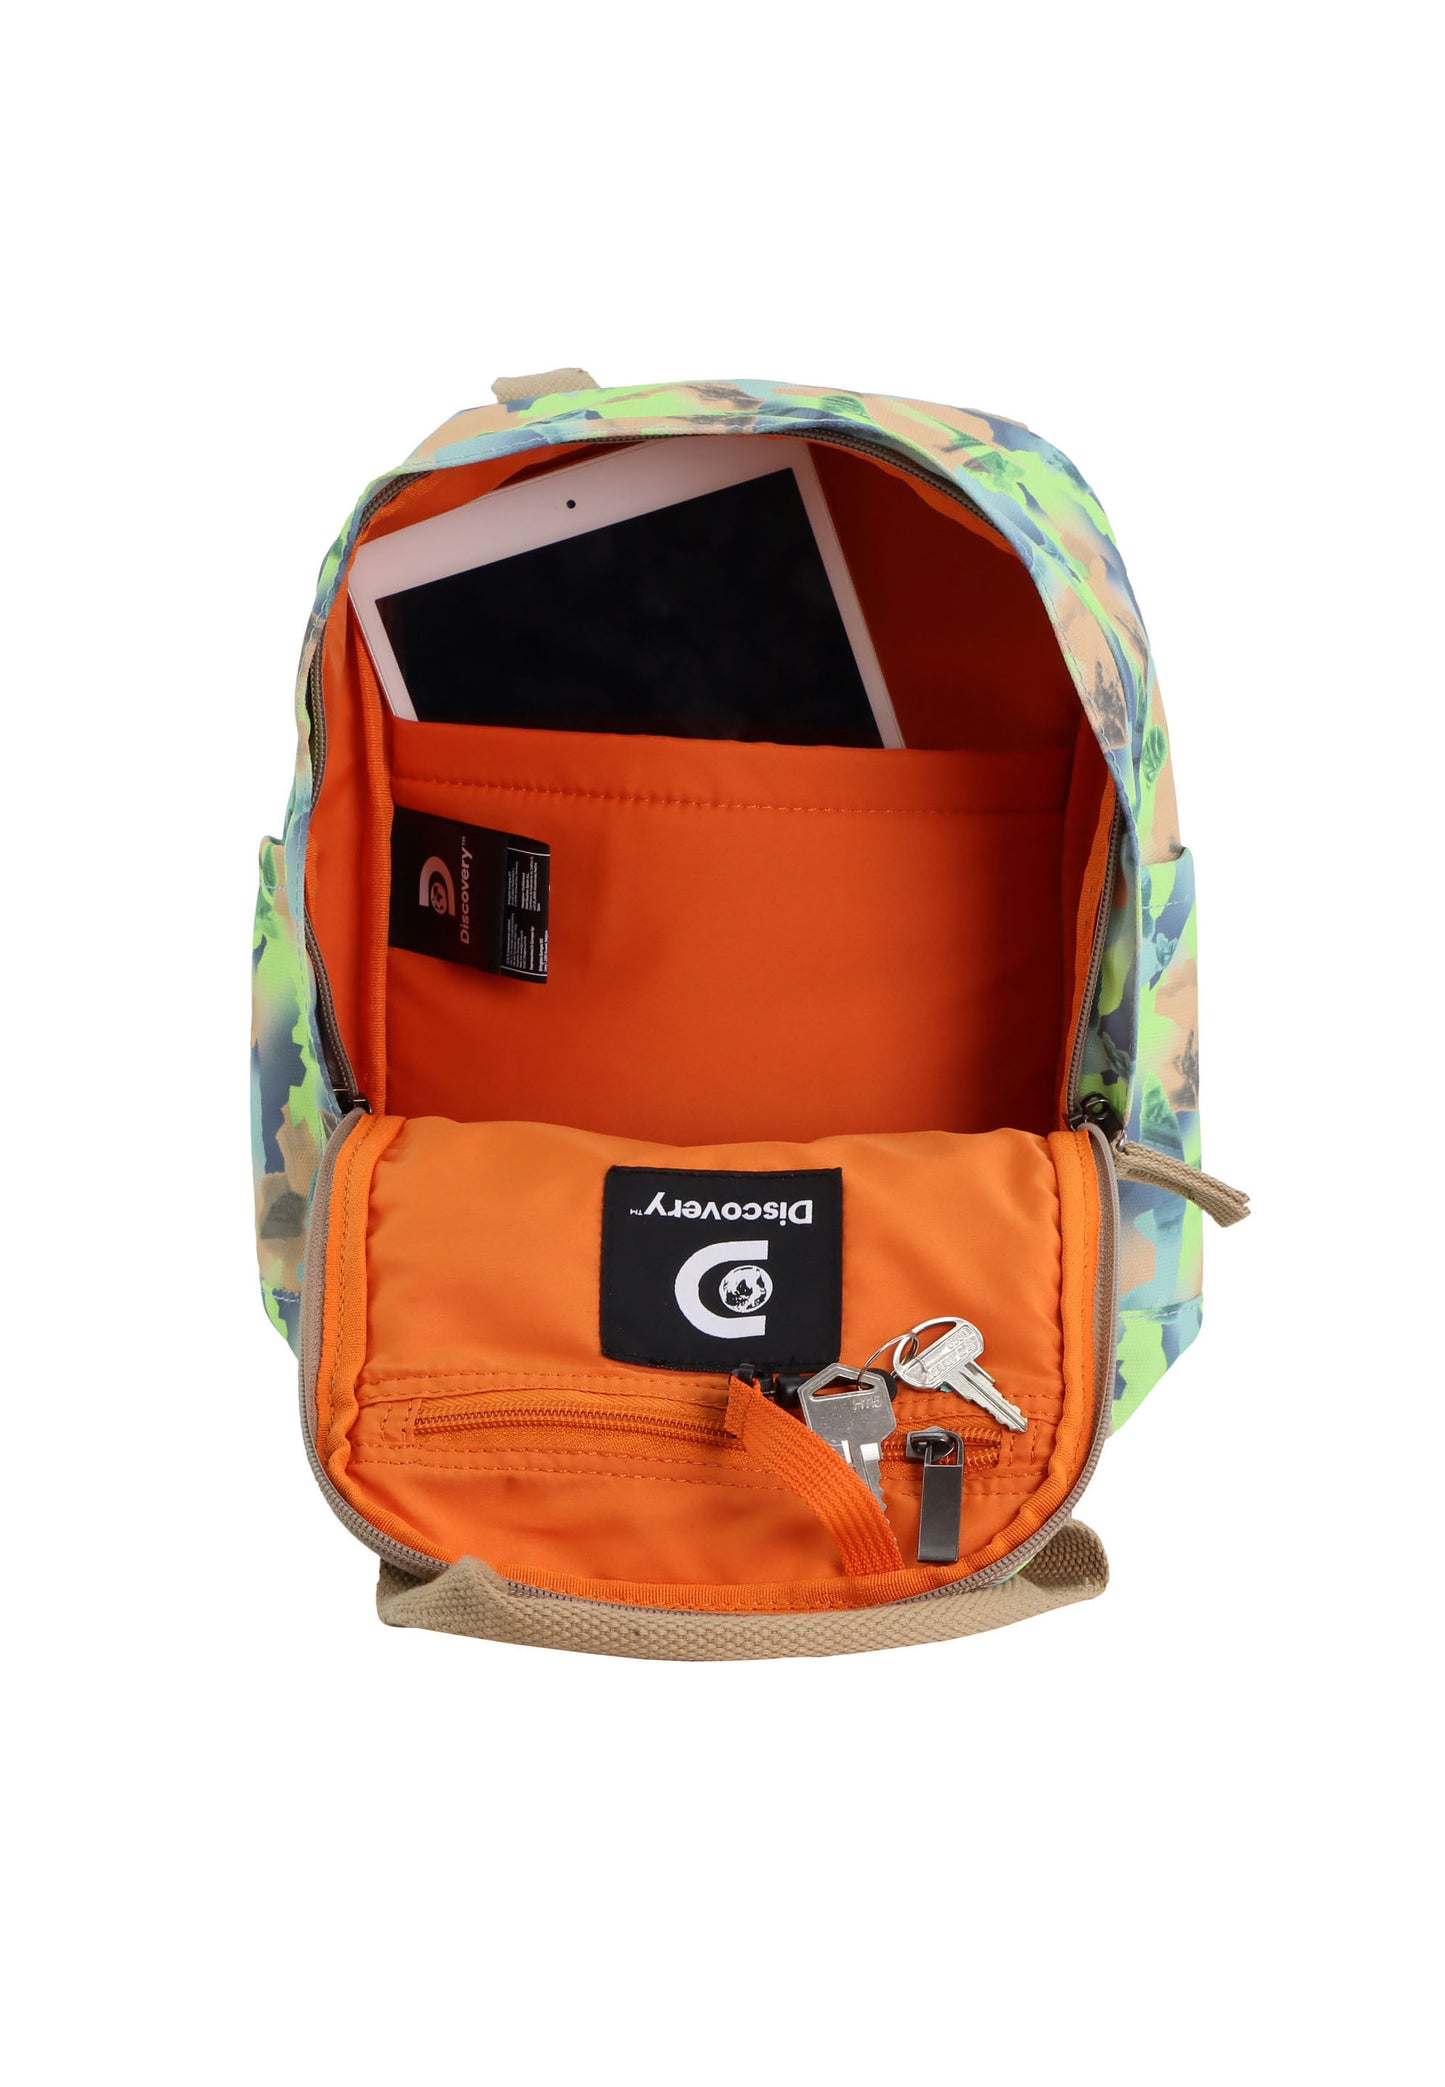 Discovery Cave Small Rugzak / Schooltas Groene Camouflage